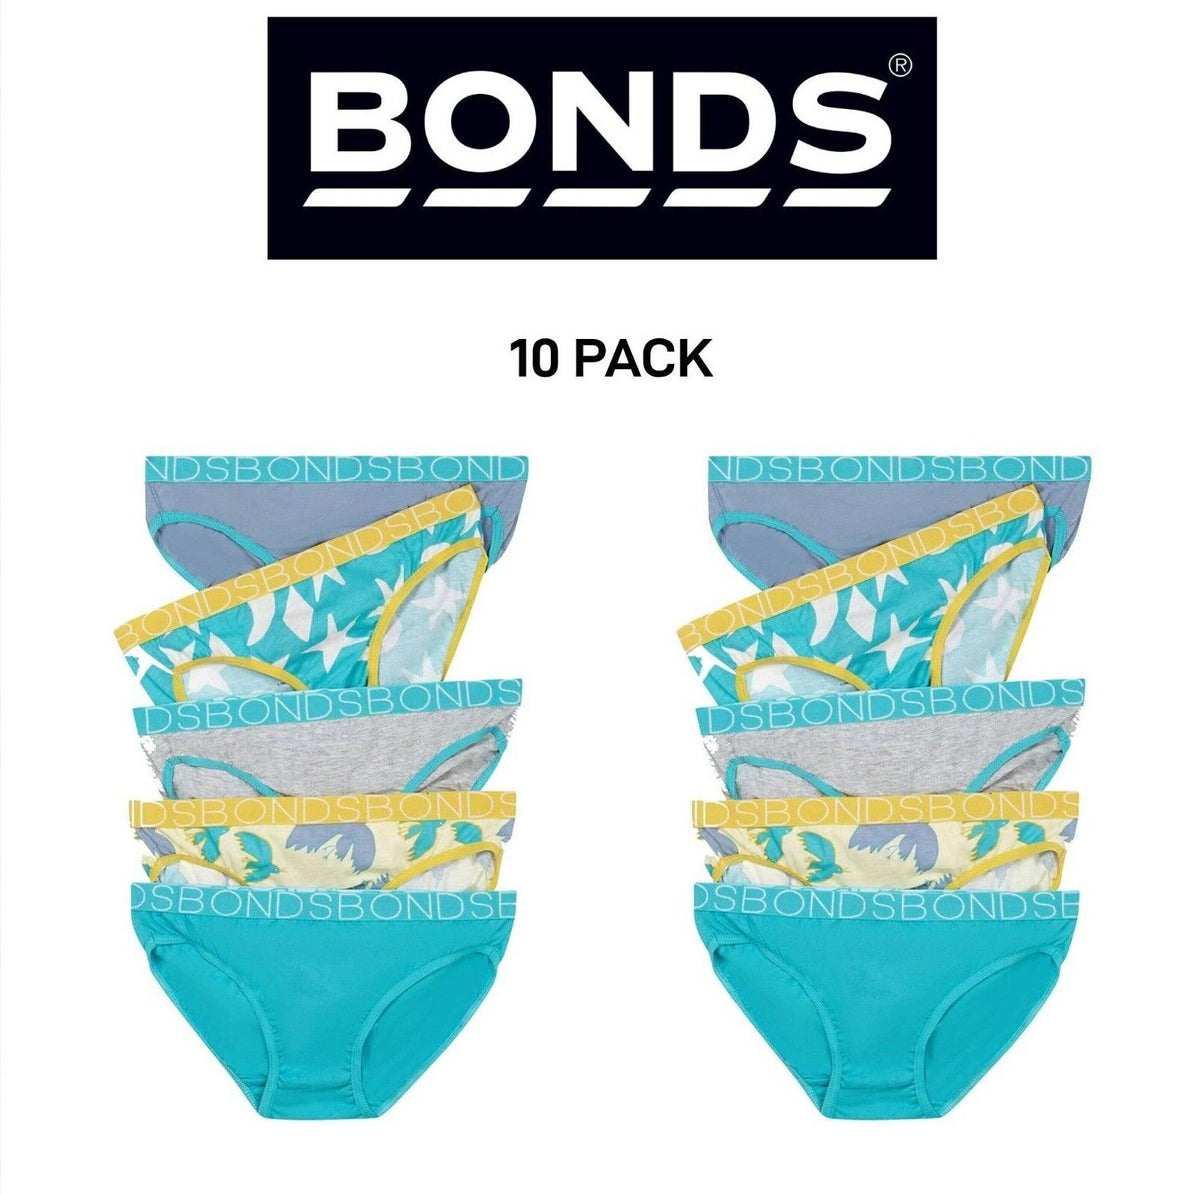 Bonds Girls Bikini Soft and Stretchy Perfect Everyday Coverage 10 Pack UWNV5A